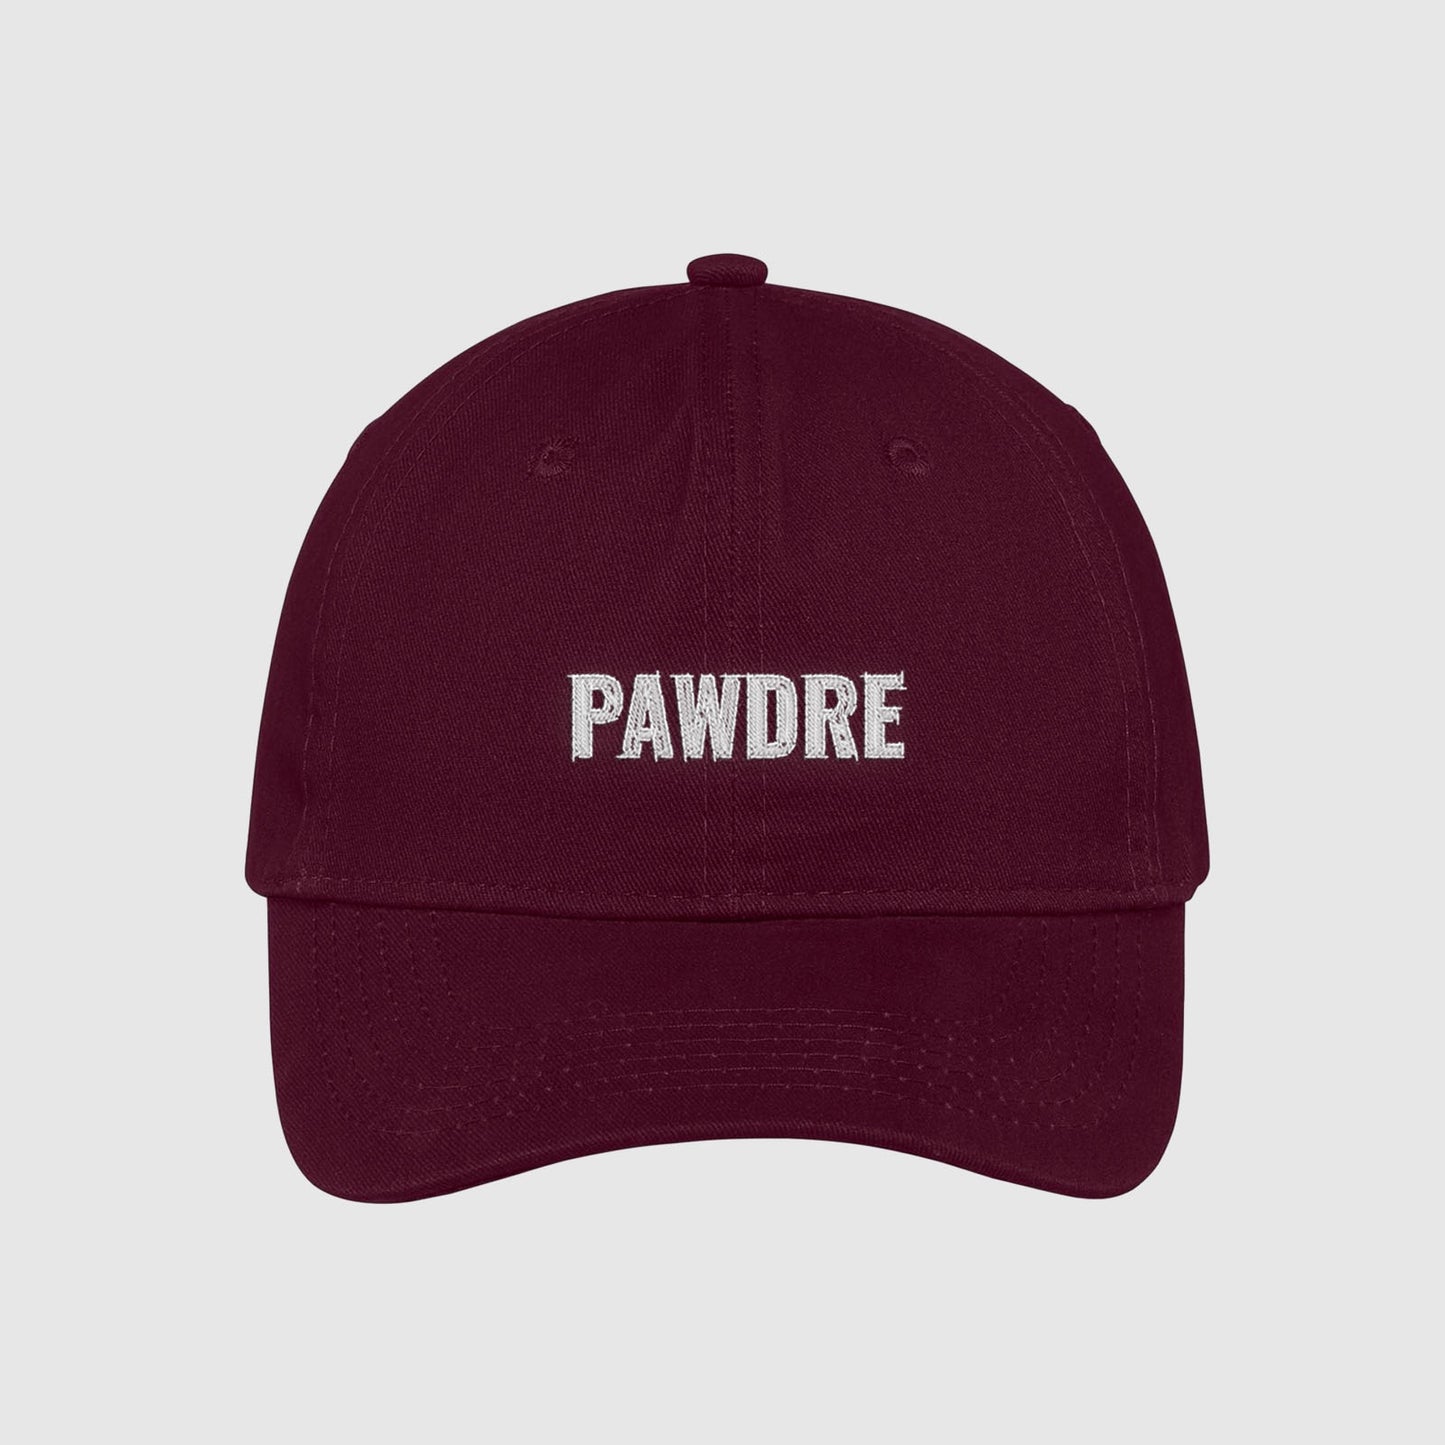 Maroon Pawdre Hat embroidered with white text.